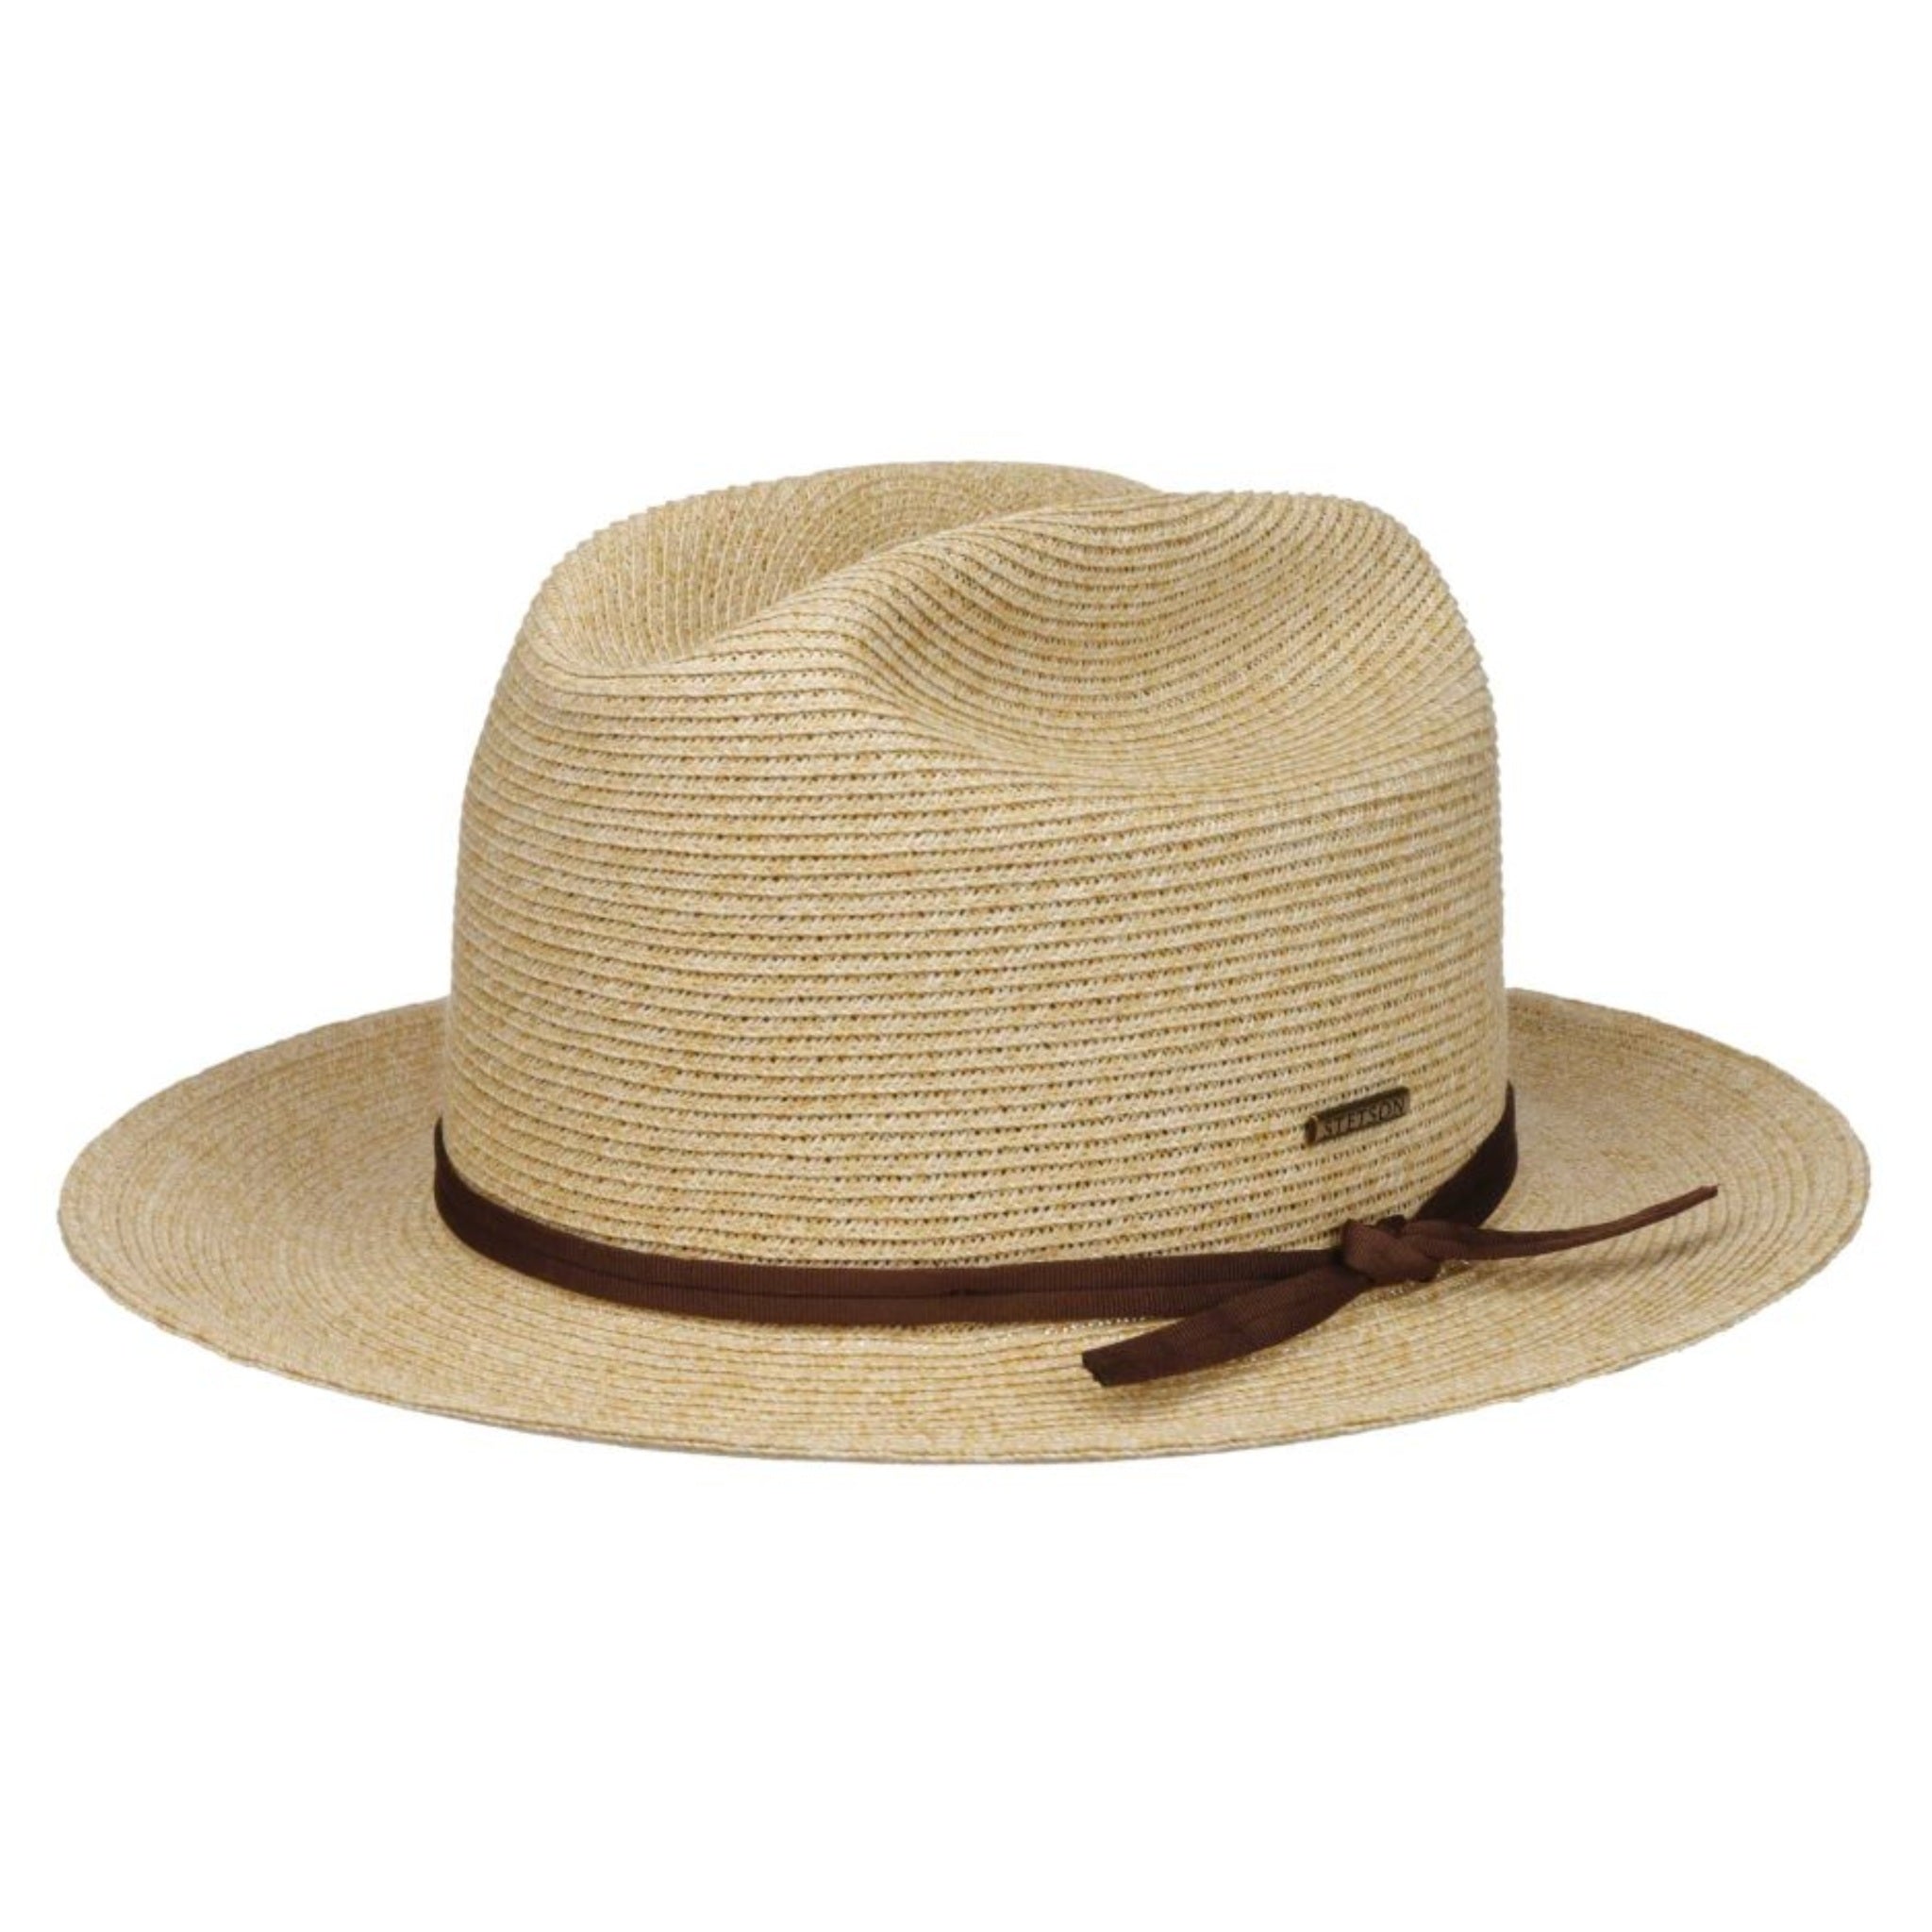 The Hat Shop Stetson Open Road Toyo Straw Hat